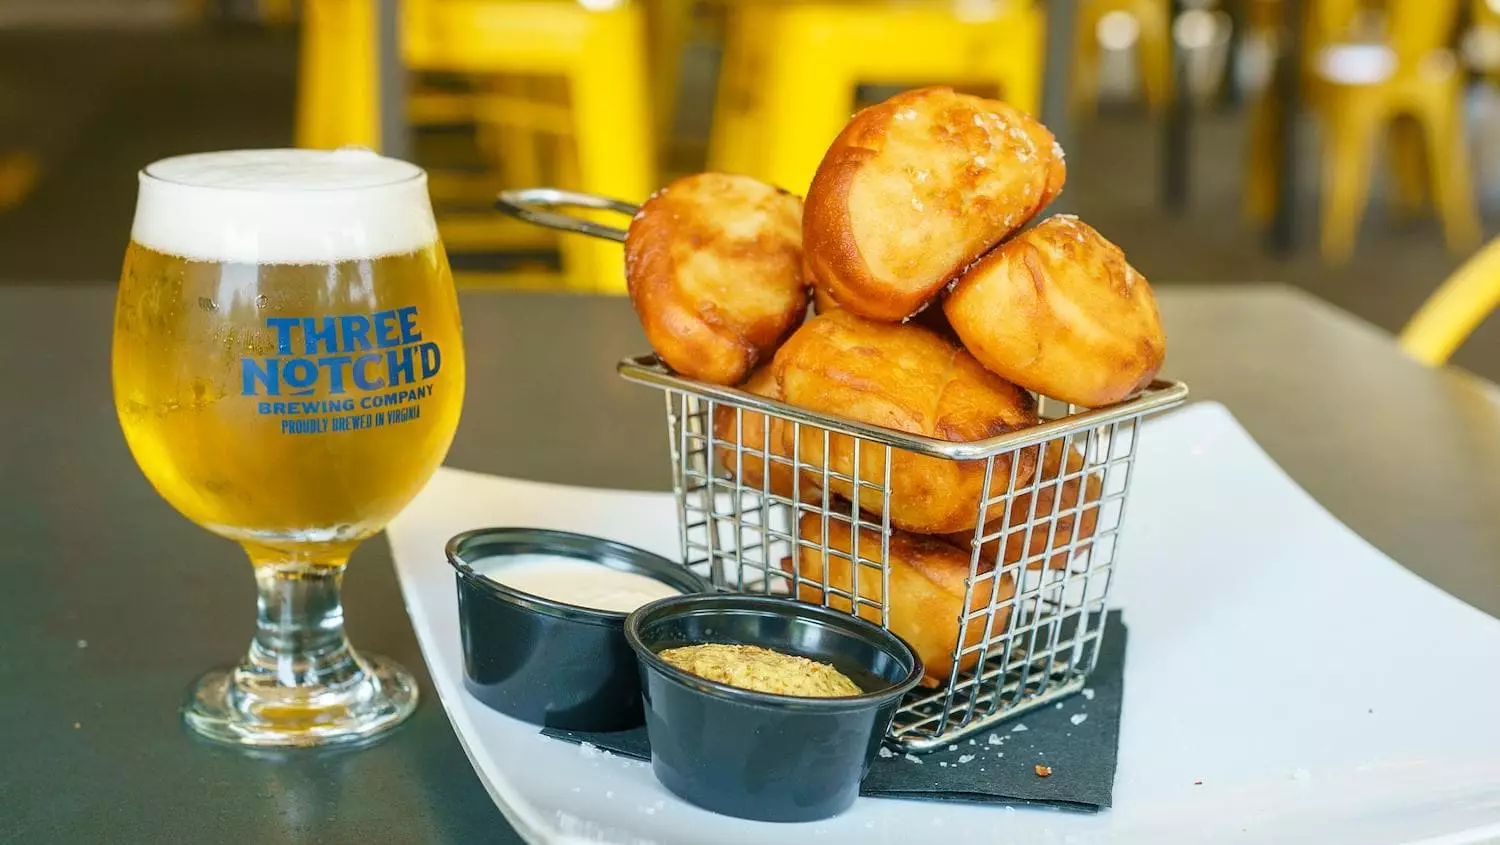 House-made pretzel bites seasoned with sea salt & served with 40 Mile Beer Cheese & Hydraulion whole grain mustard dipping sauces.